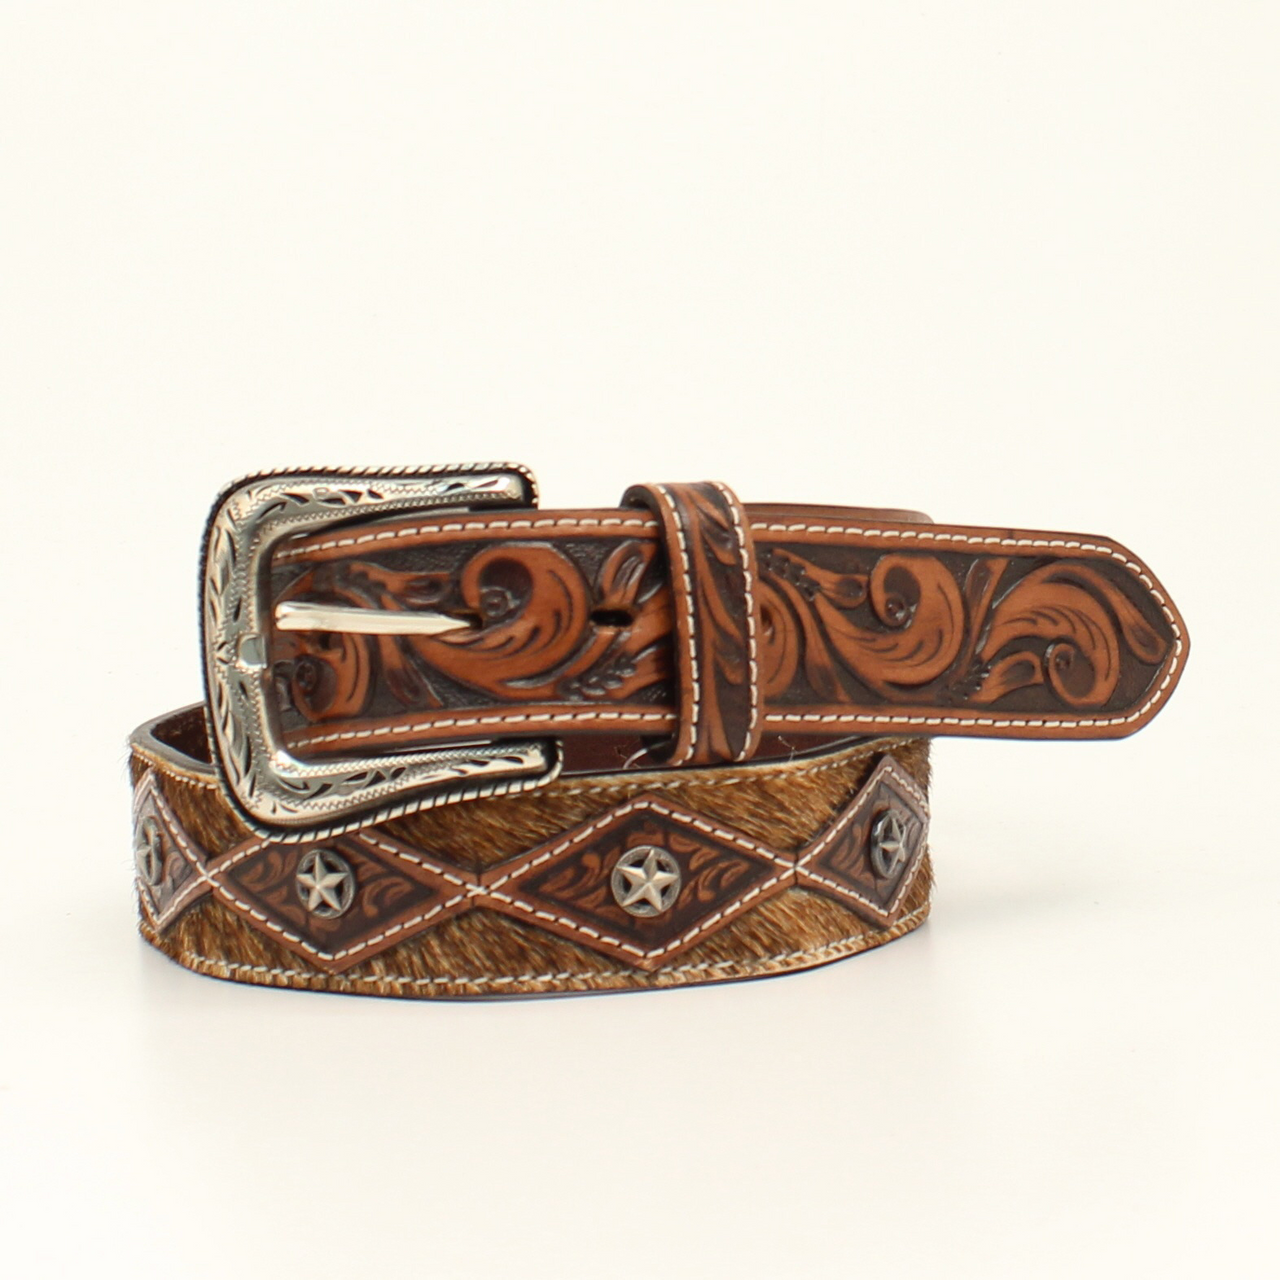 Ariat Men's Calf Hair Concho Floral Tooled Western Belt - Brown